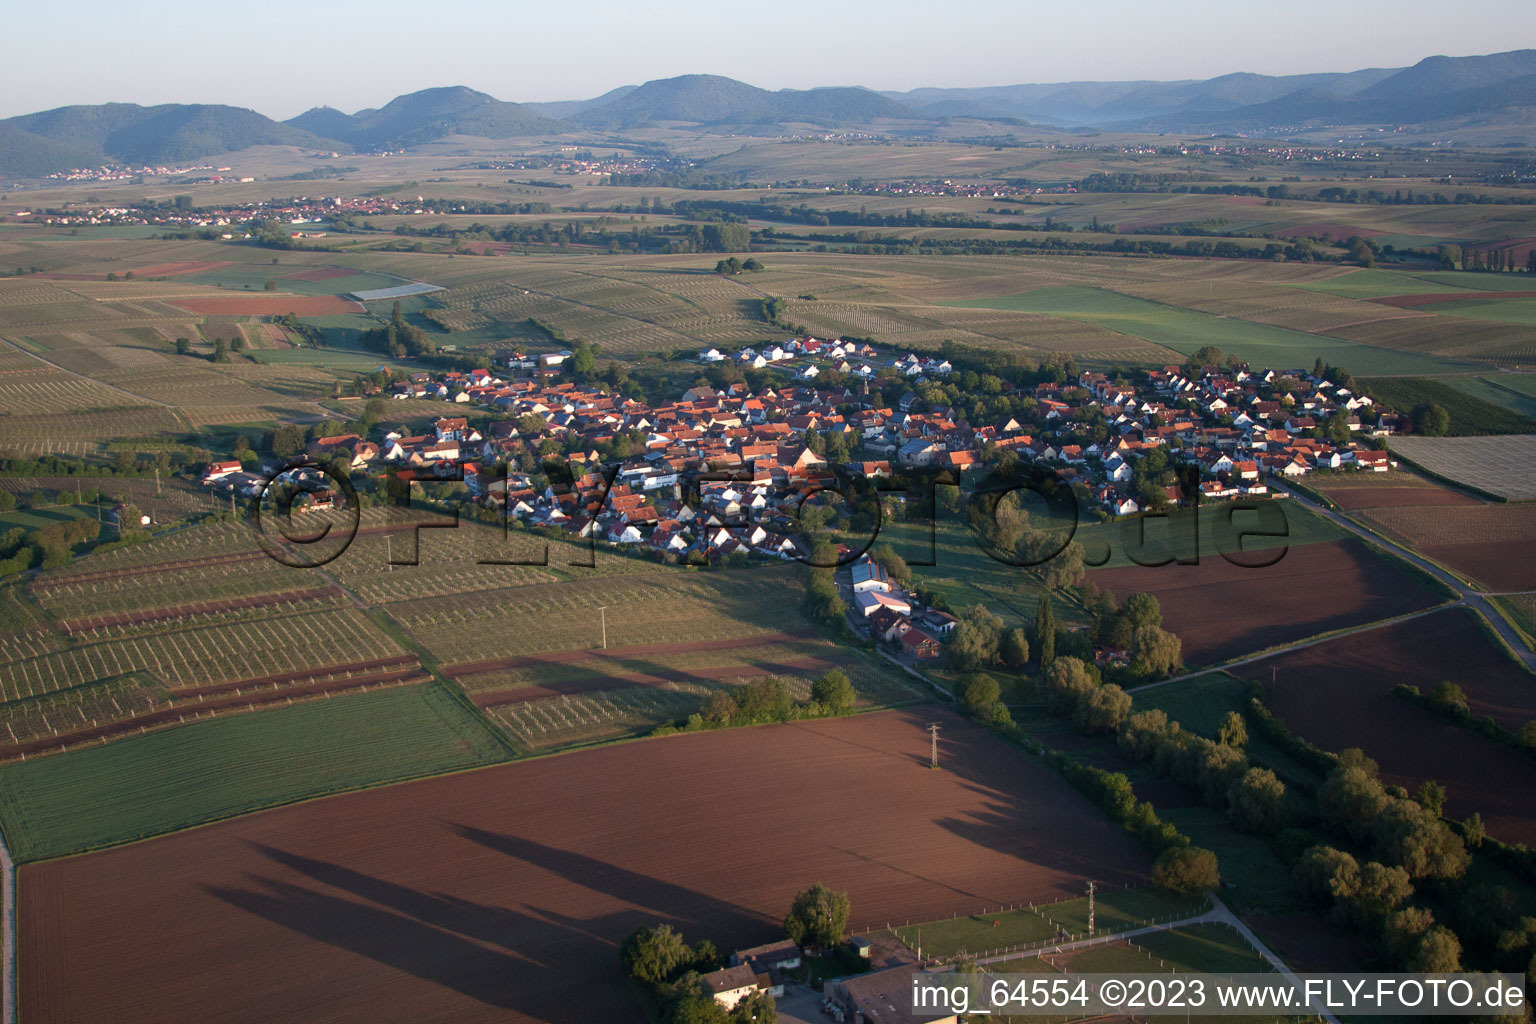 Impflingen in the state Rhineland-Palatinate, Germany out of the air